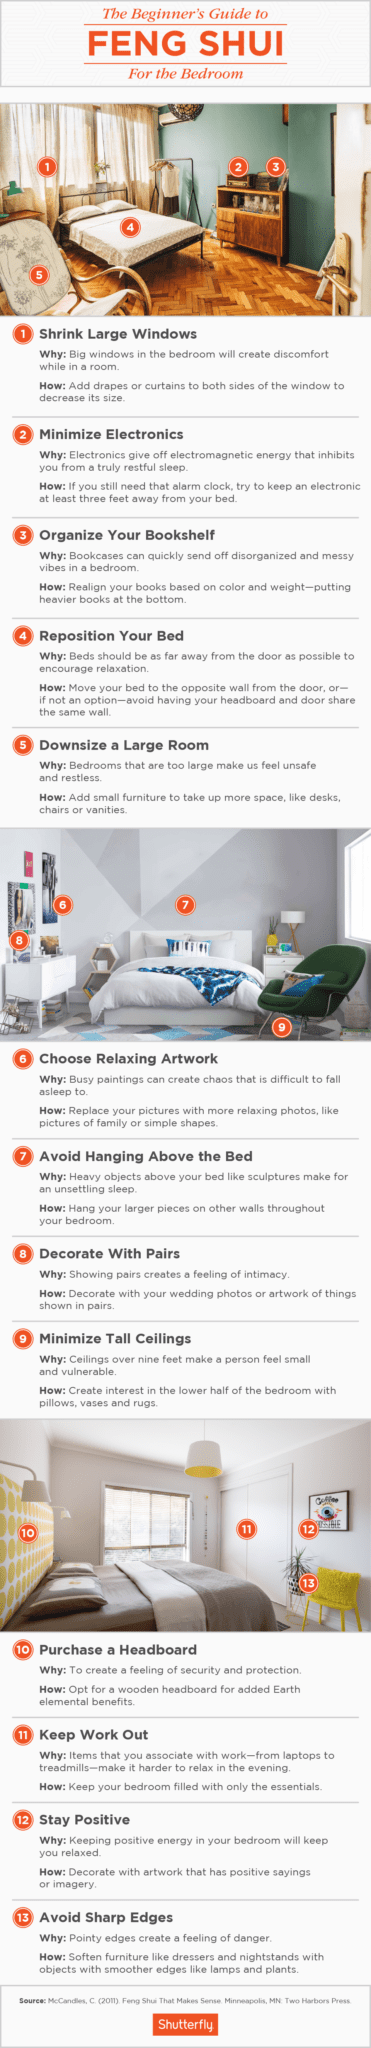  Here's everything you need to know to find peace in your bedroom with feng shui. PLUS free infographic to guide you as you decorate your bedroom.